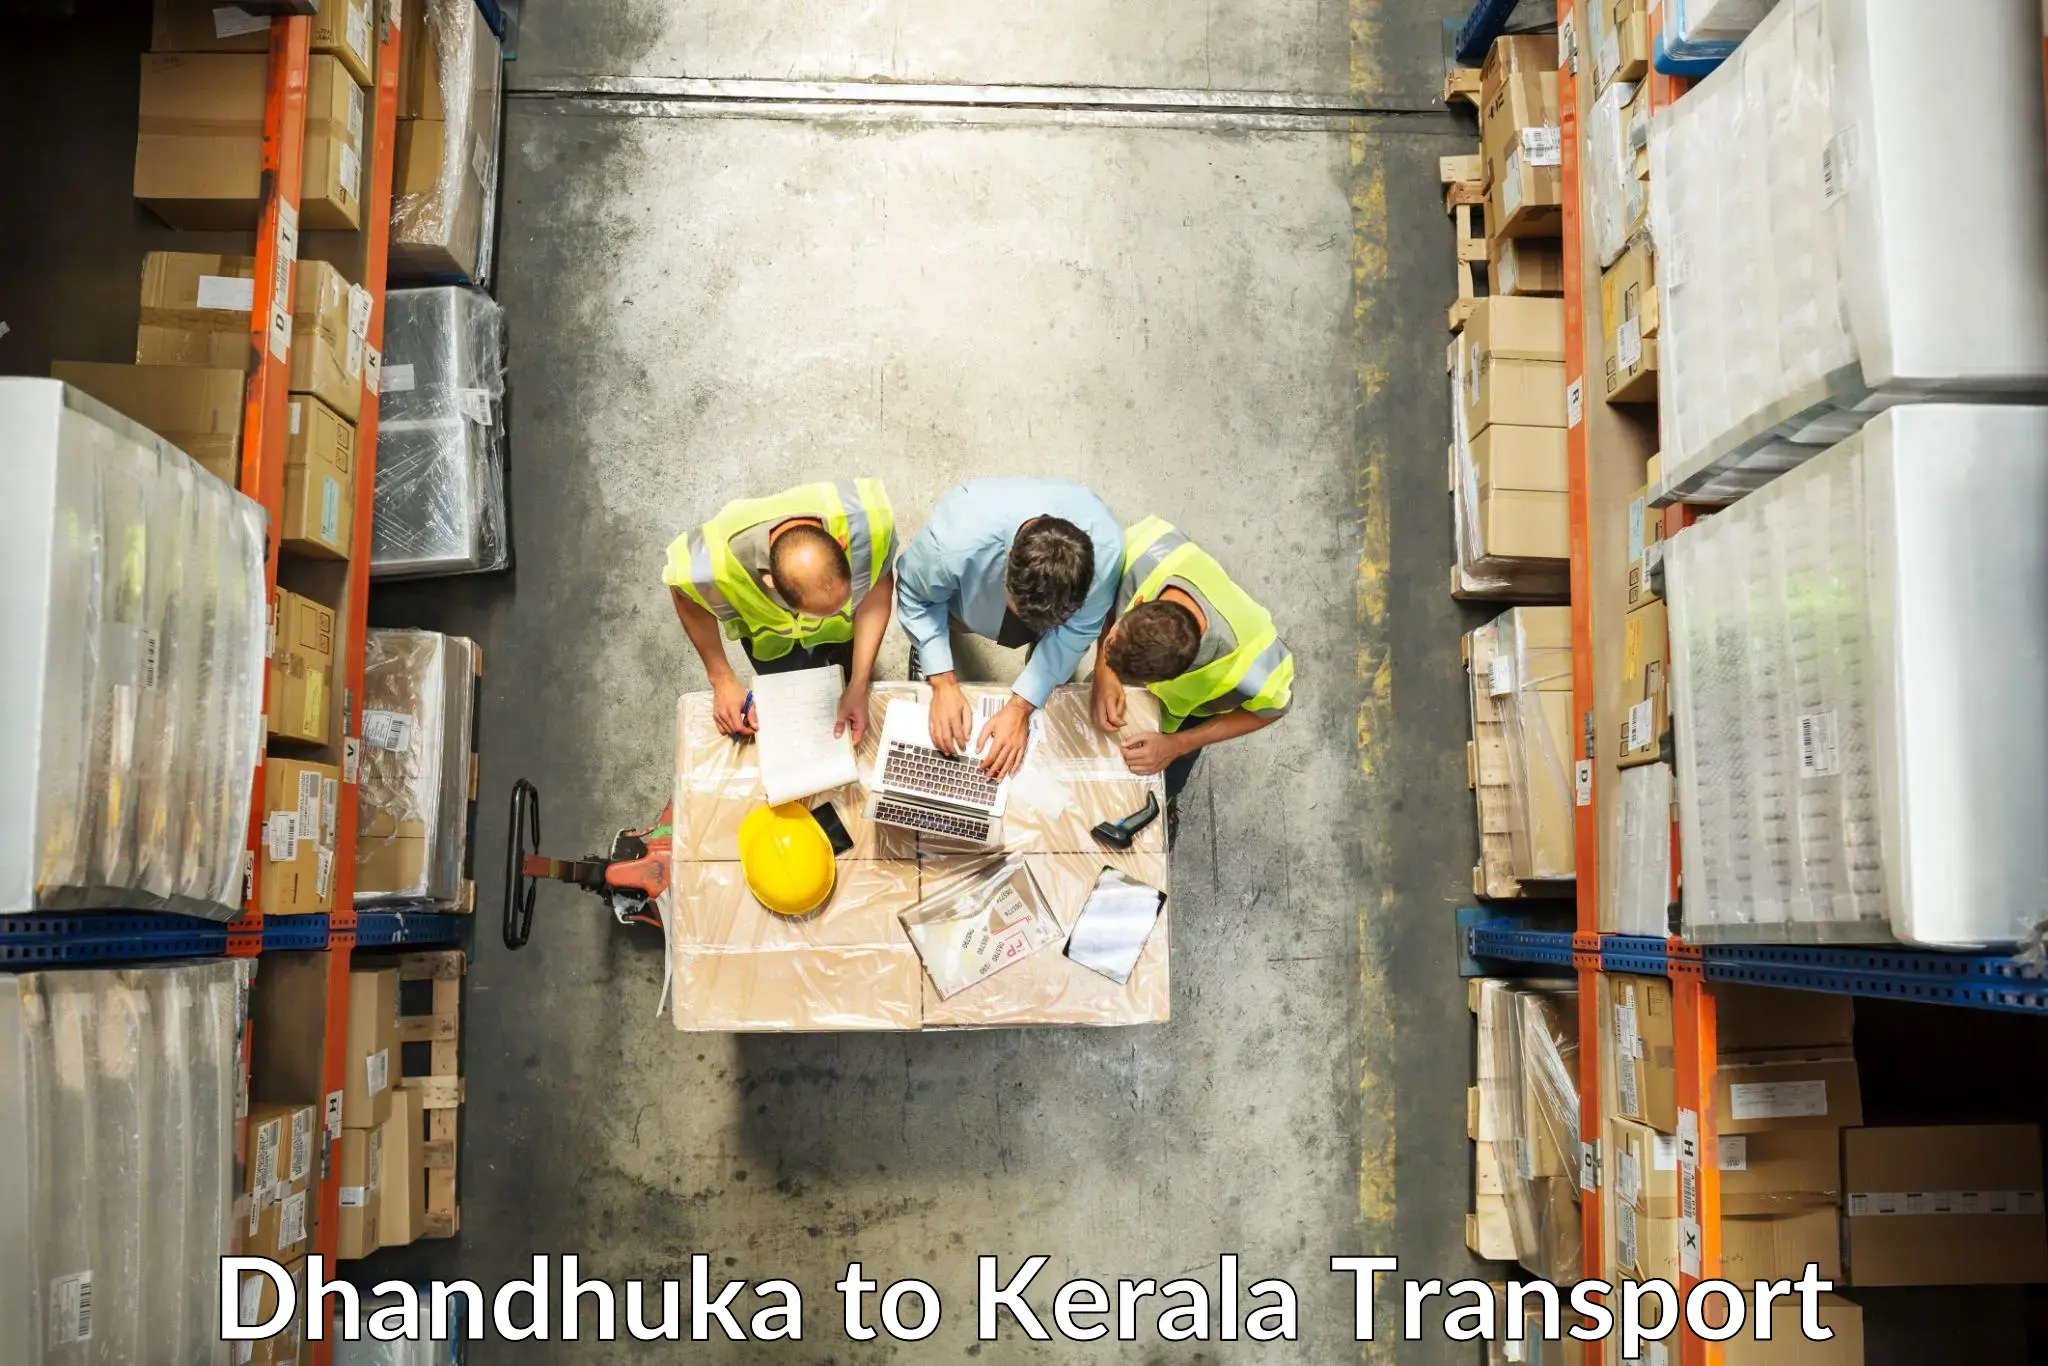 Commercial transport service Dhandhuka to Kerala